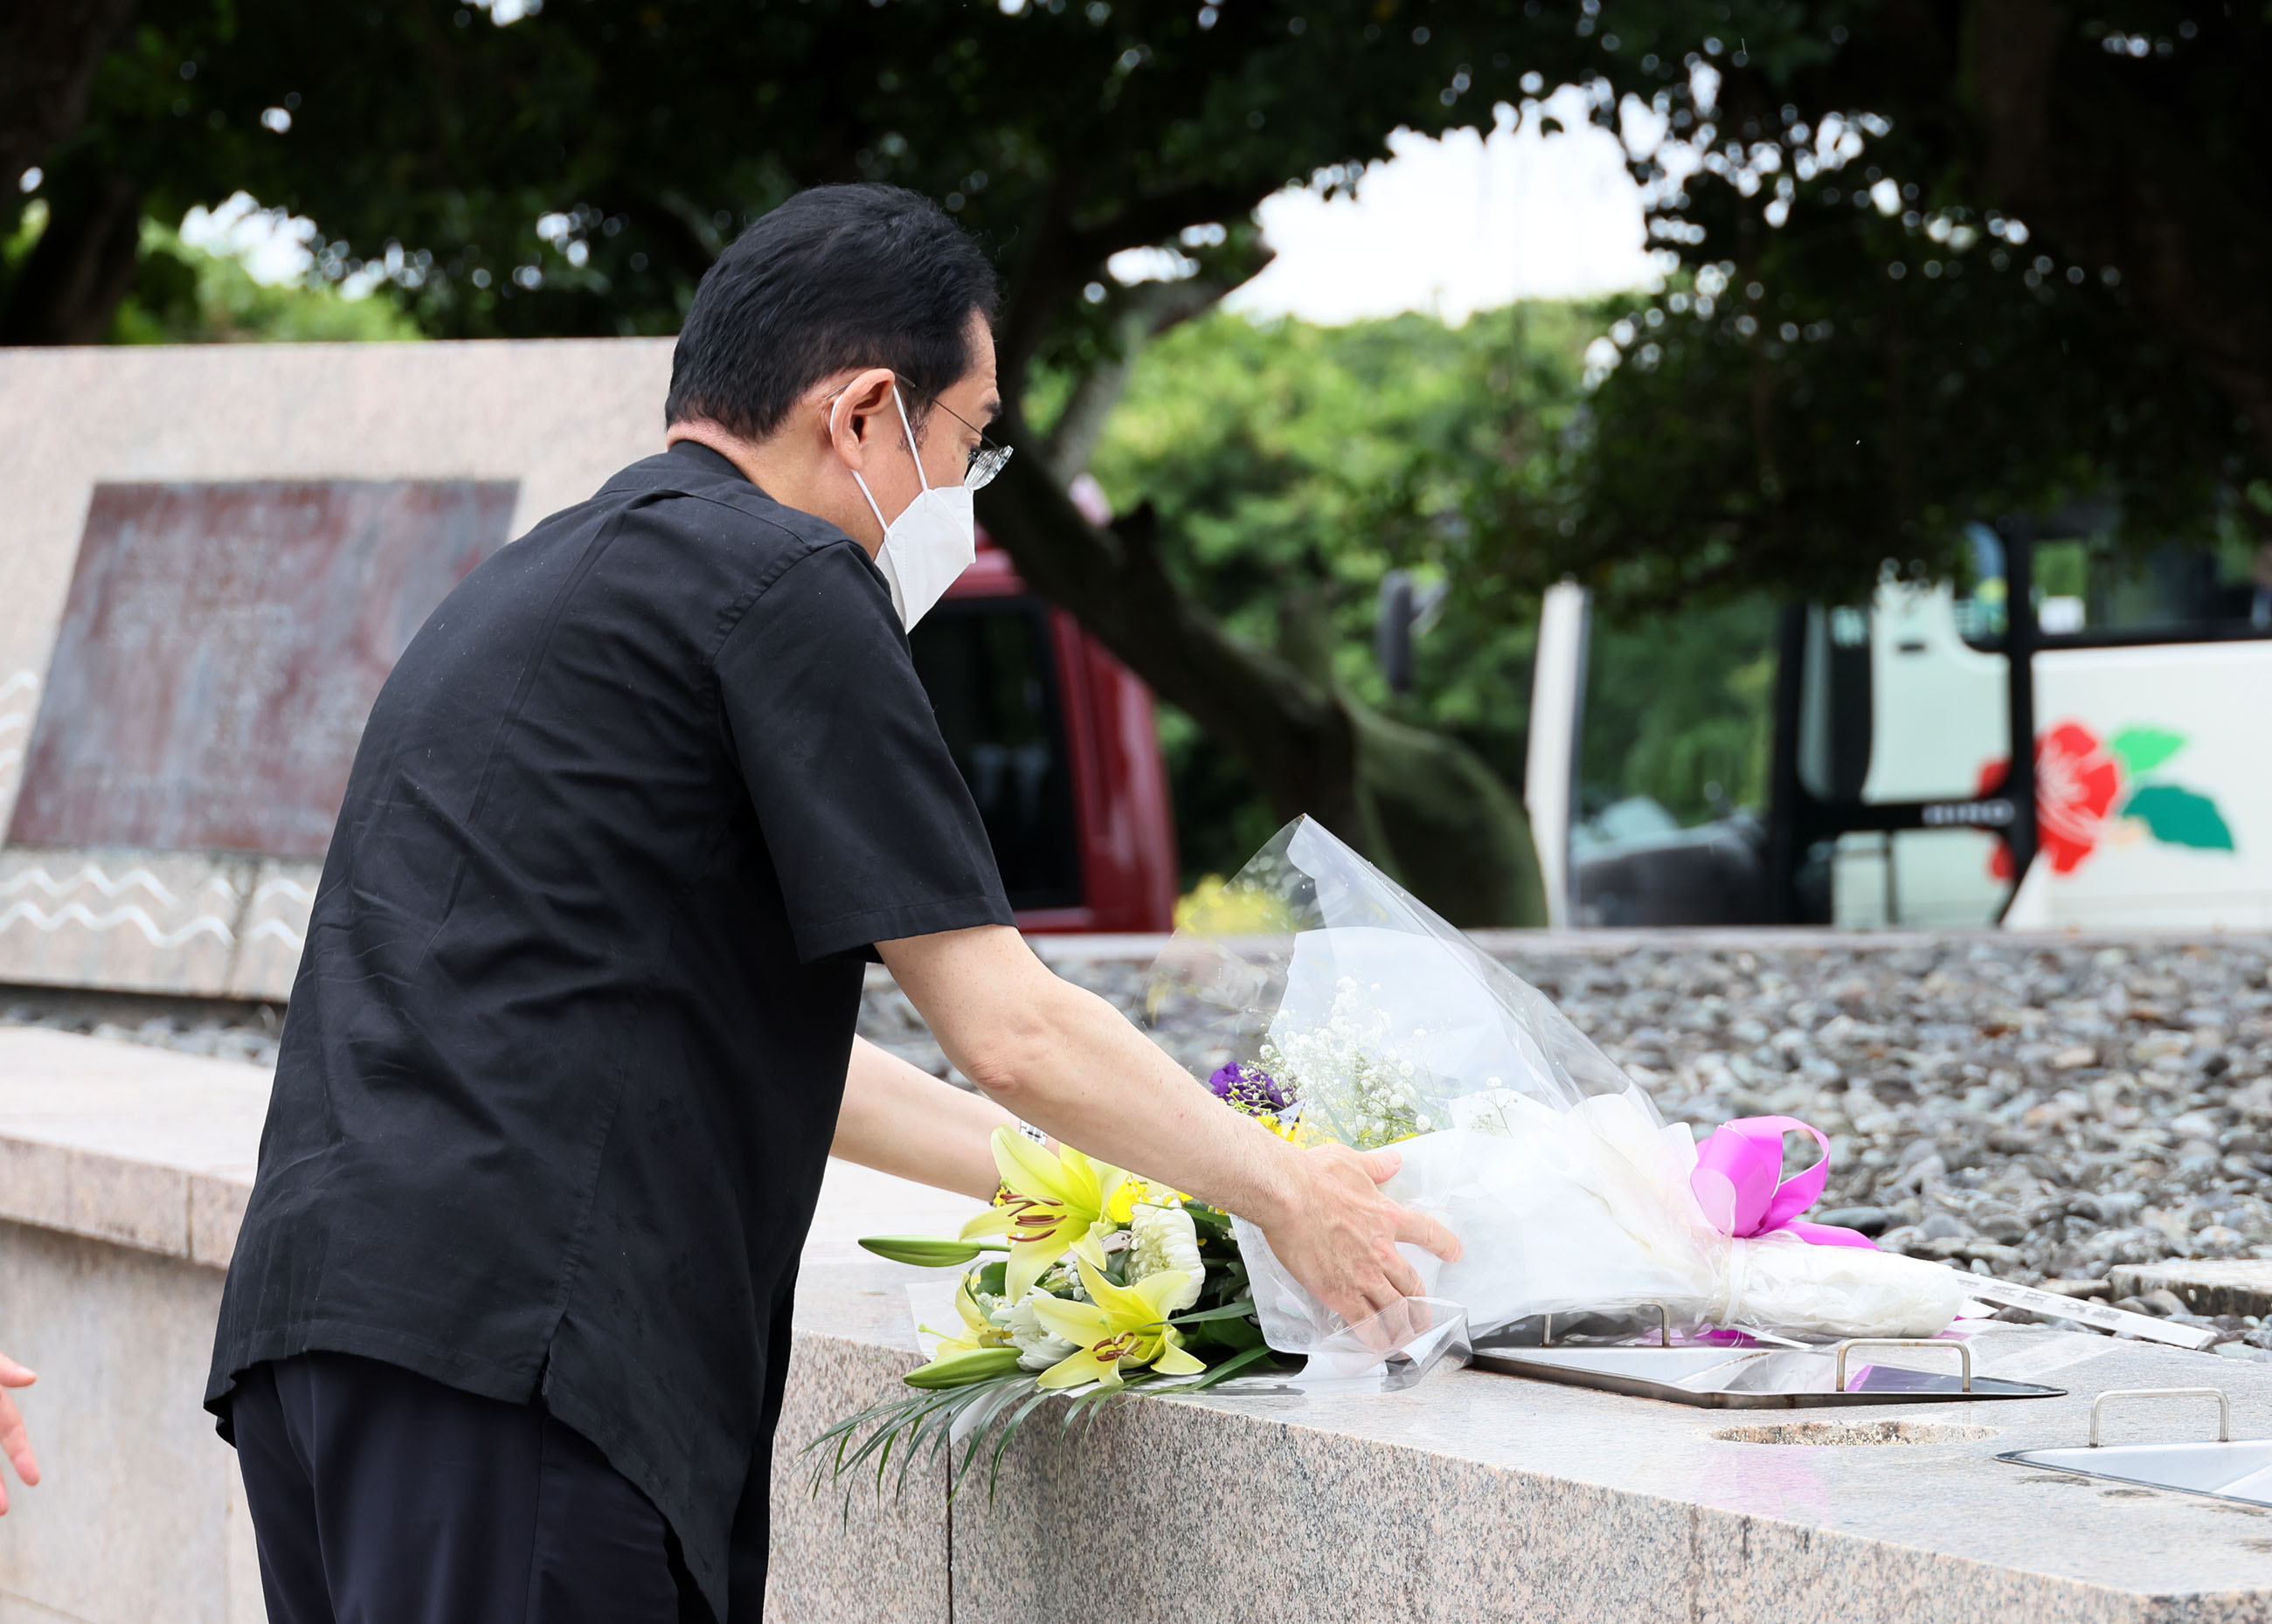 Photograph of the Prime Minister offering flowers at the Hiroshima Monument (1)